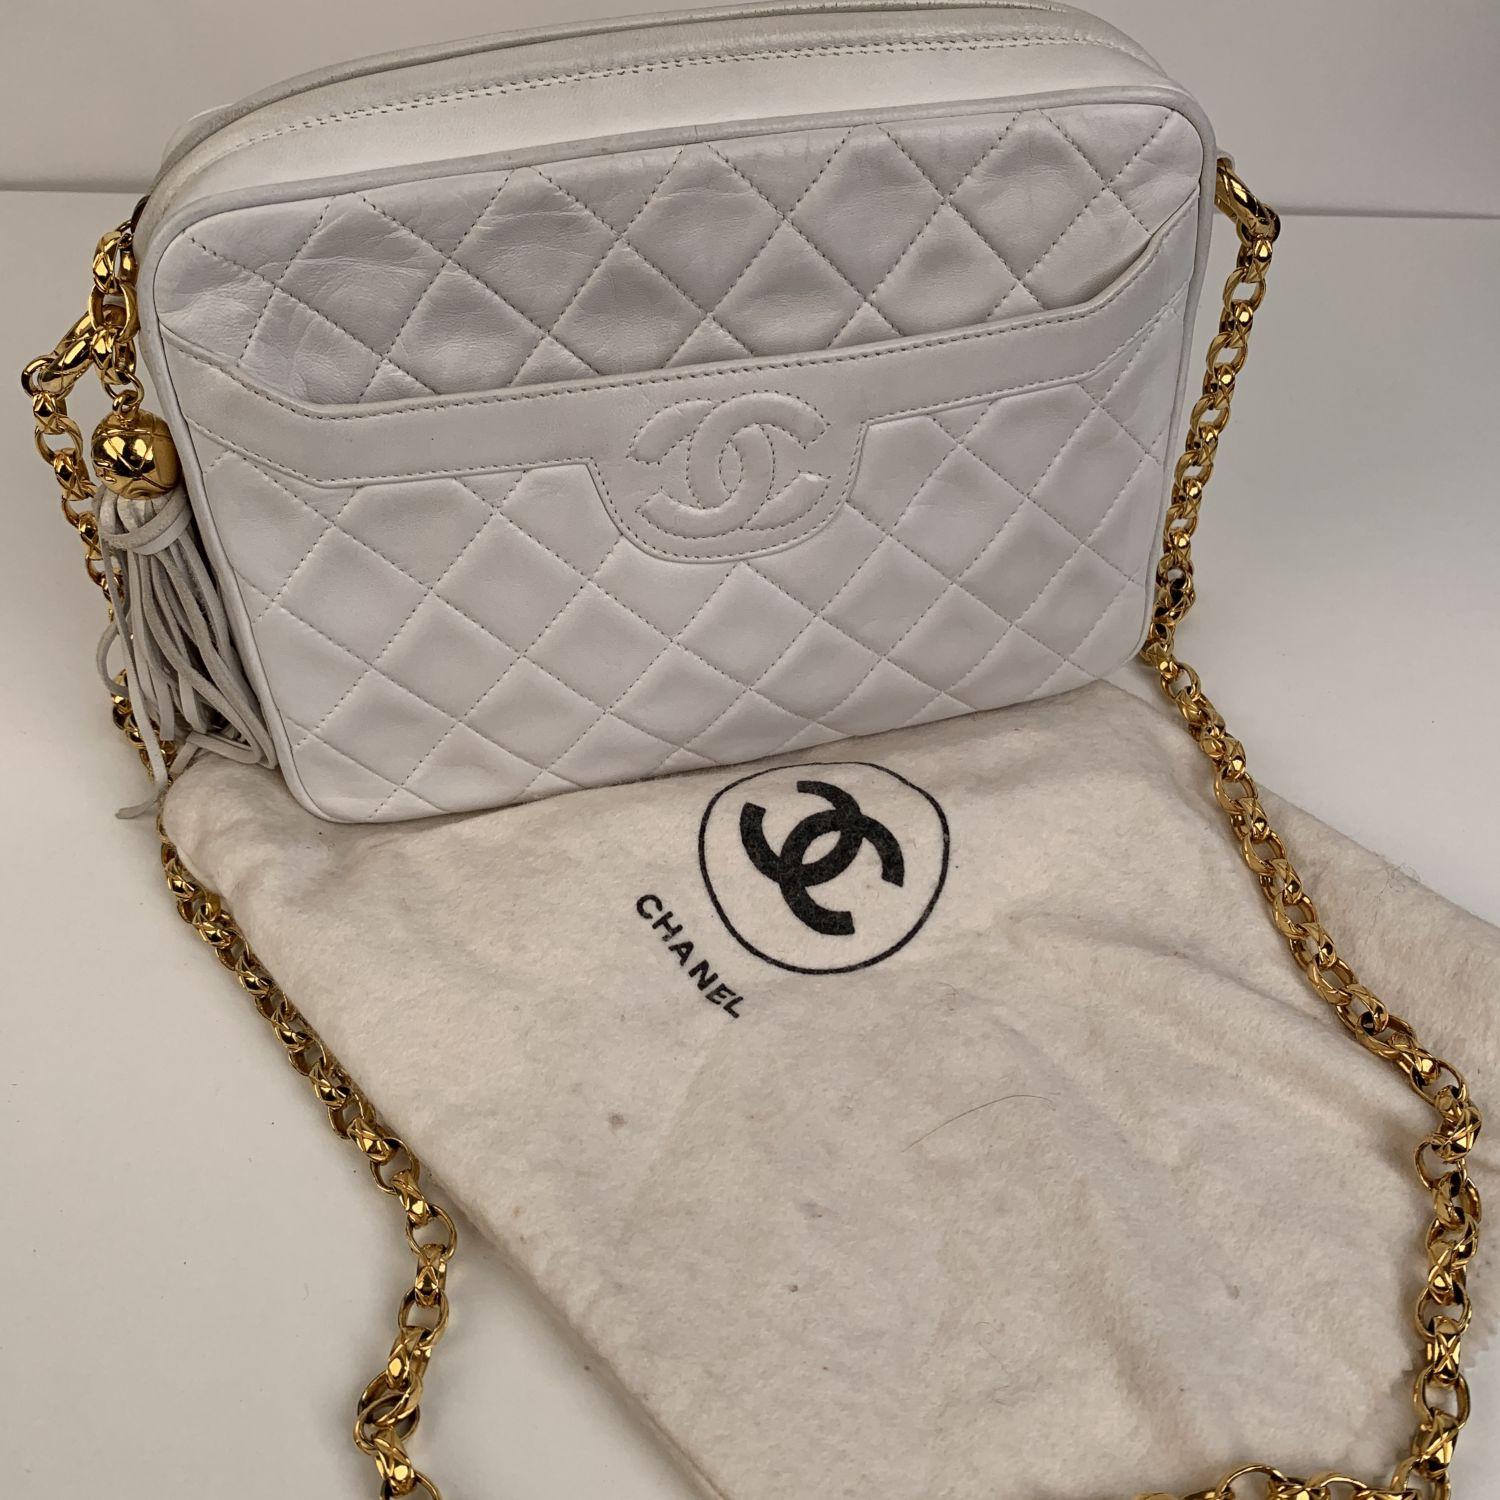 Chanel Vintage White Quilted Leather CC Stitch Camera Bag 10